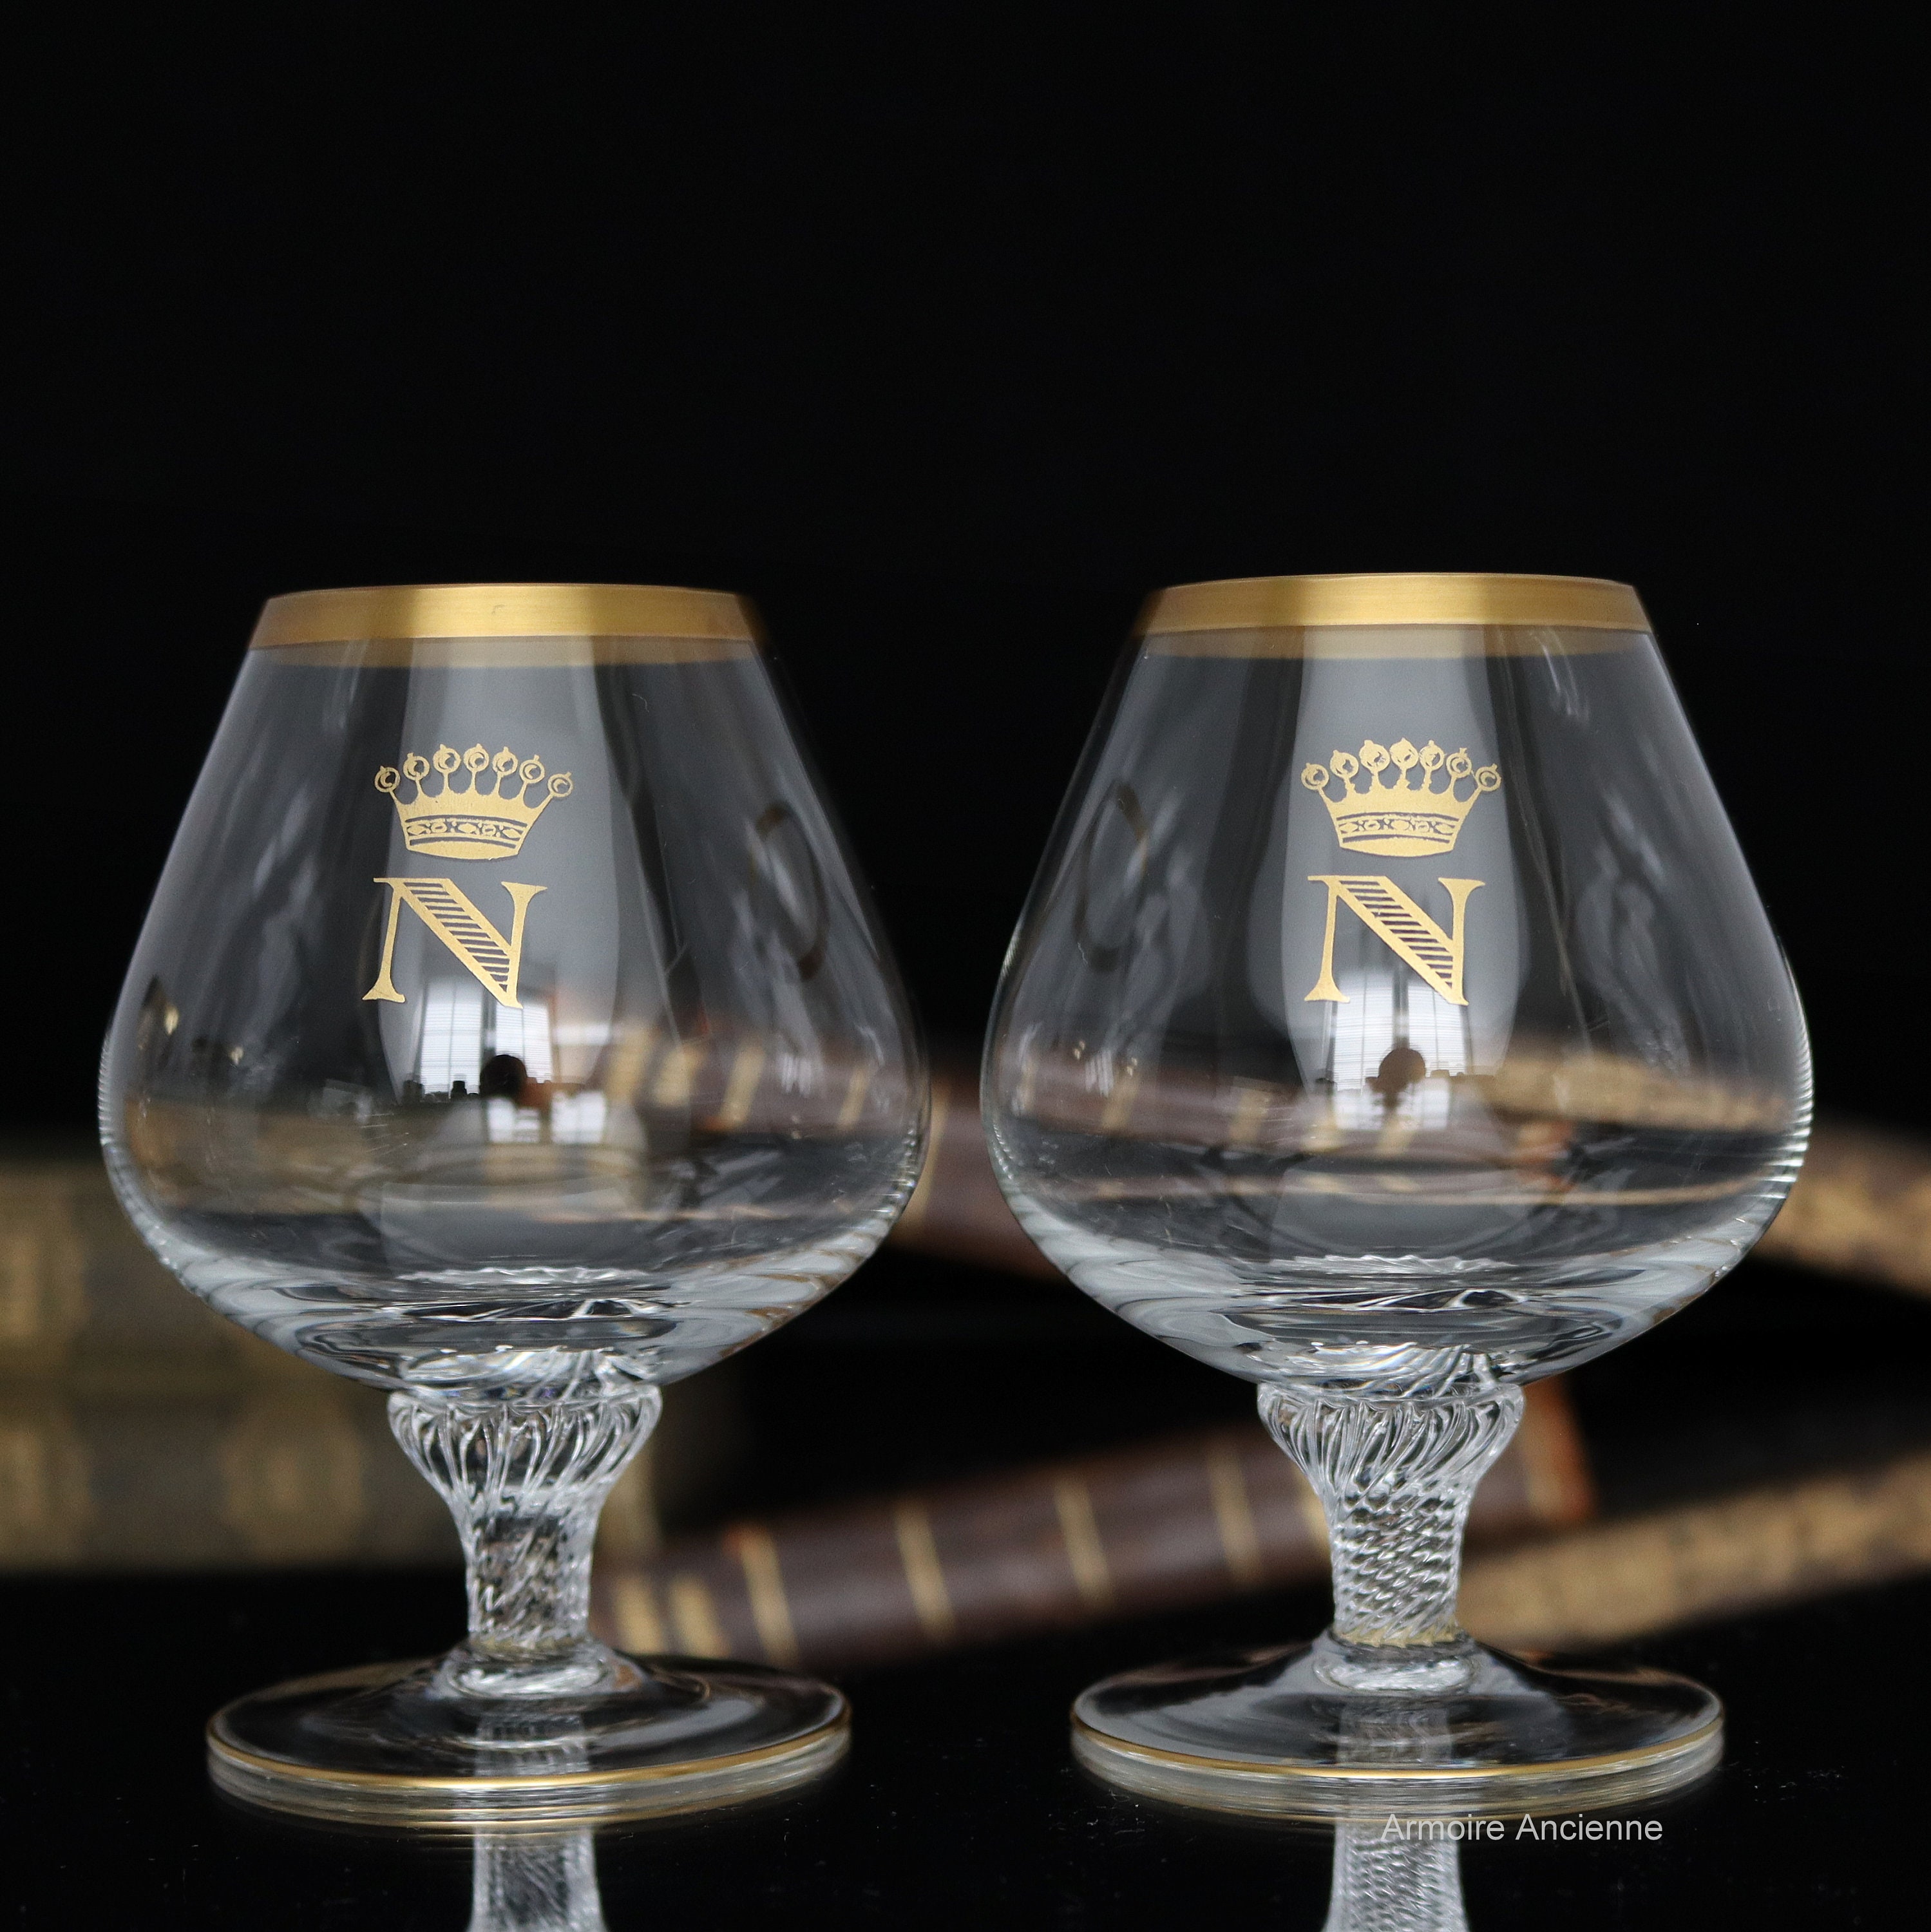 Set of 2 Hand Made Vintage Crystal Glasses, Brandy & Cognac Snifter with  24K Gold Rim, Old-Fashioned Glassware, 7 fluid ounces